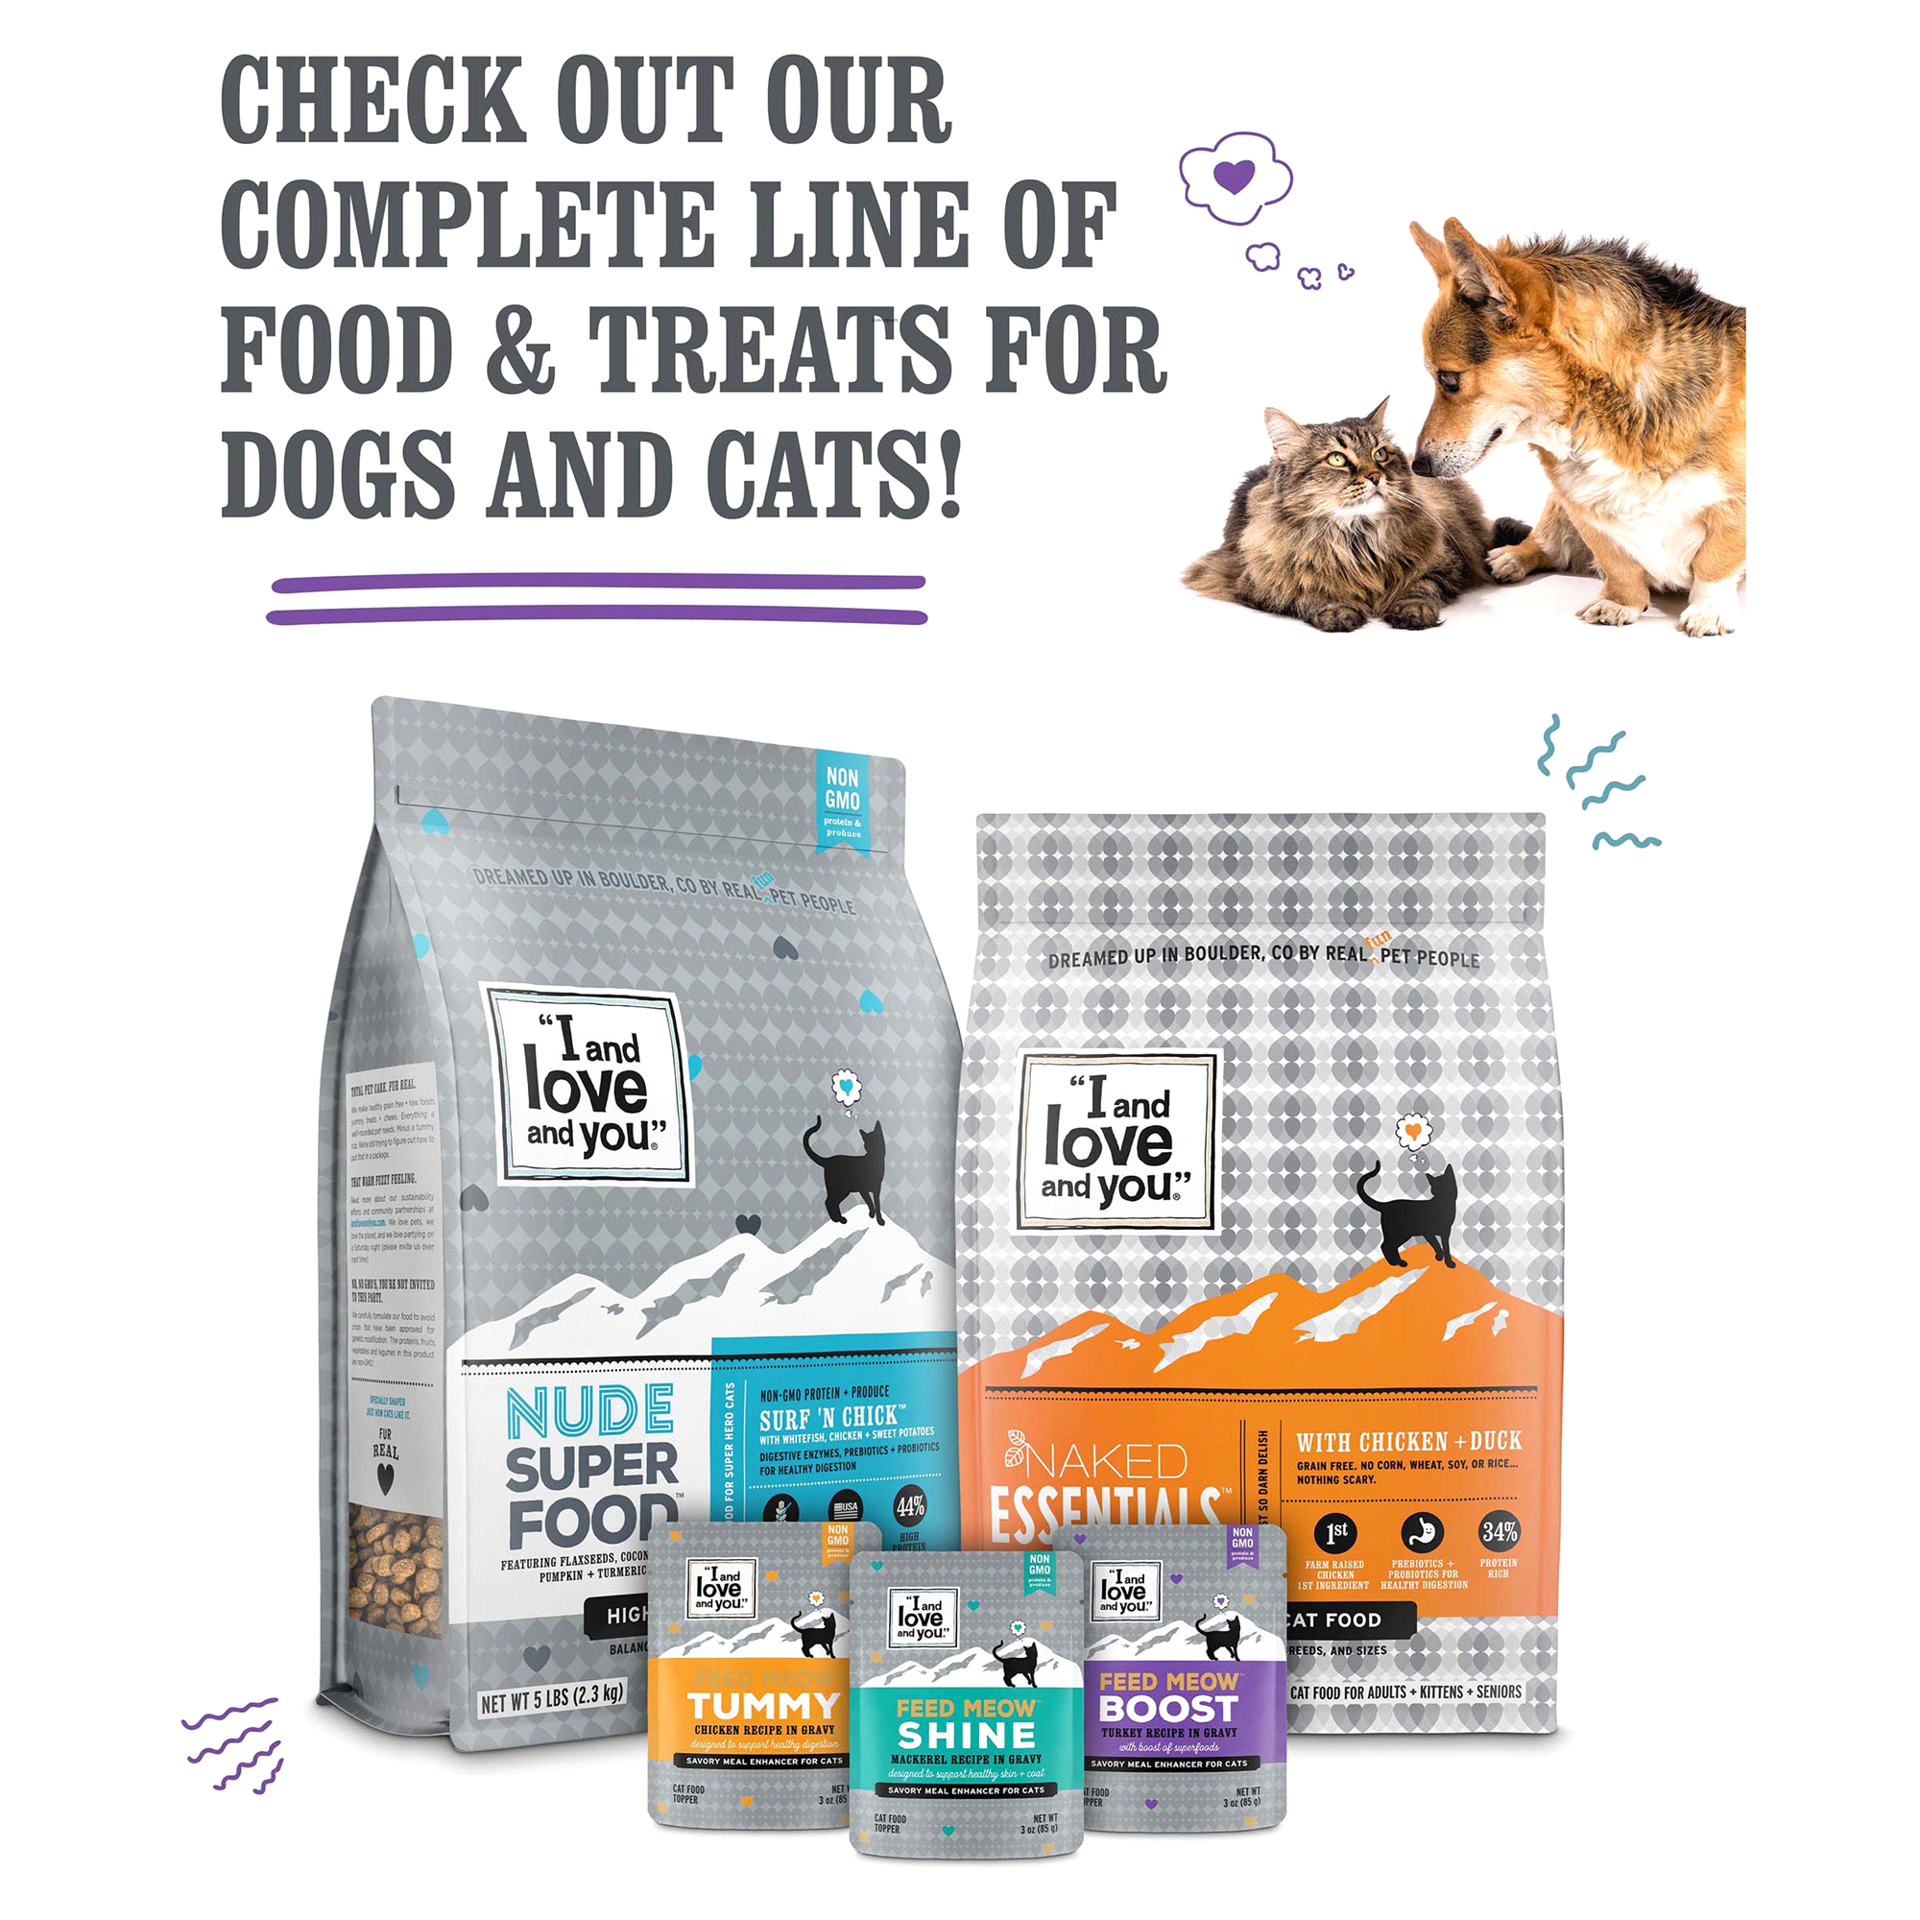 slide 14 of 29, I and Love and You Naked Essentials Chicken + Duck Grain Free Dry Cat Food, 11 lb